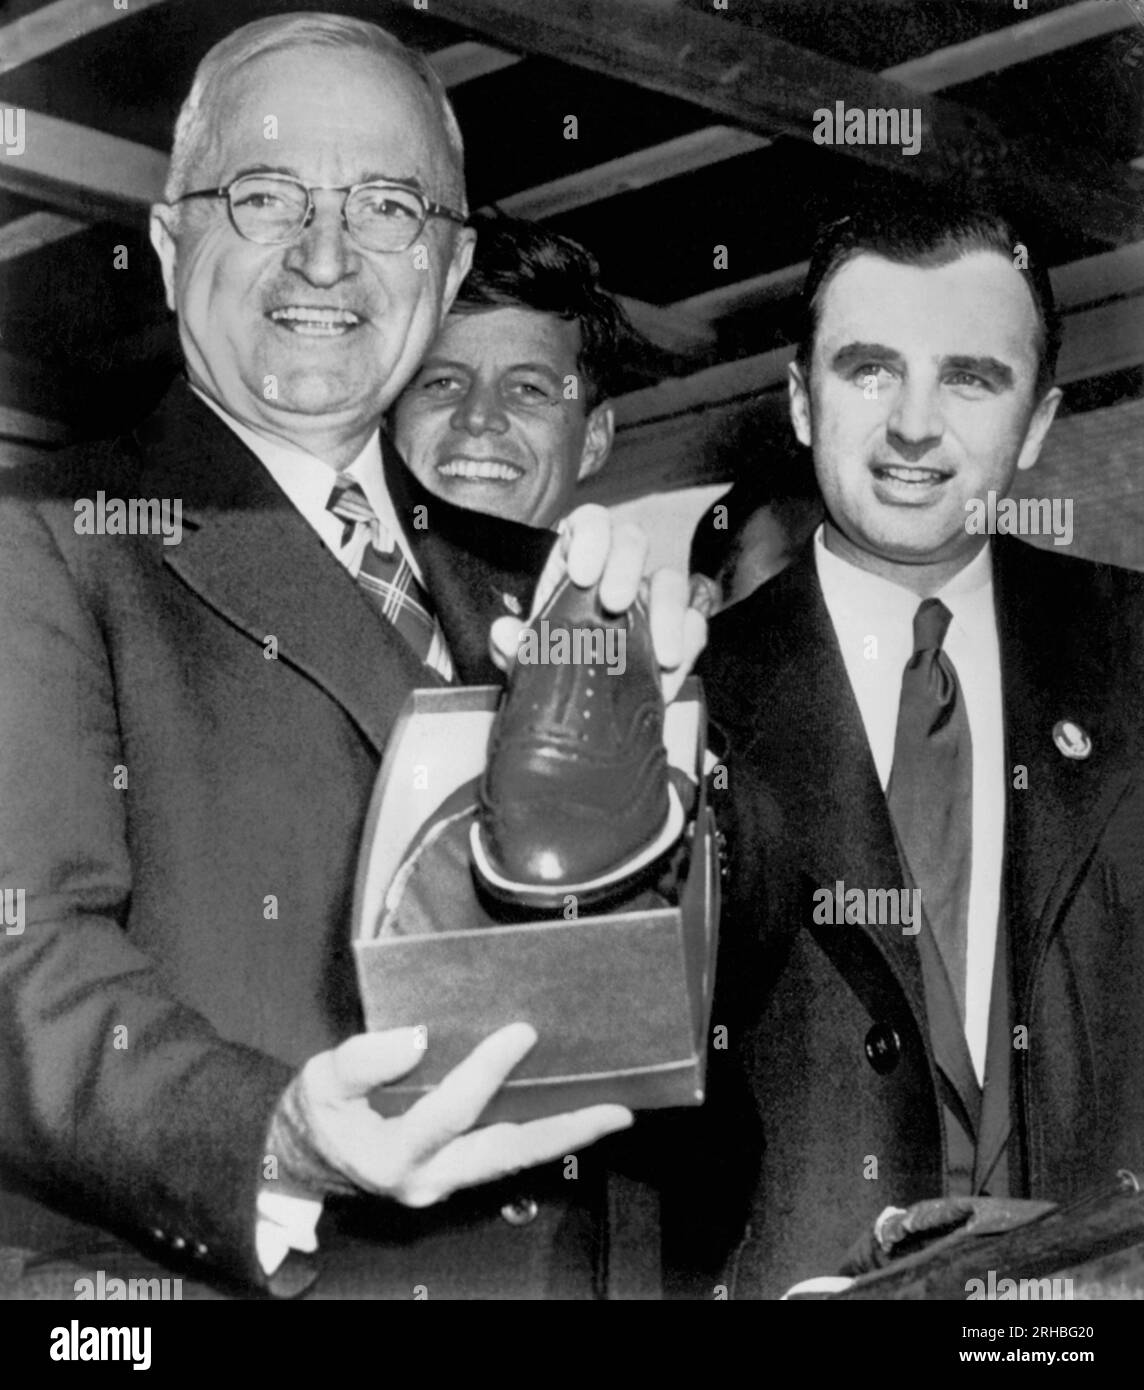 Brockton, Massachusetts:  October 18, 1952 President Truman displays a pair of shoes presented to him by Mayor Lucey (r) in this shoe center as the President continued his whistle stop tour of New England in his campaign for Democratic candidate Adlai Stevenson.  John F. Kennedy, who was not noted in the press release, stands in the background. Stock Photo